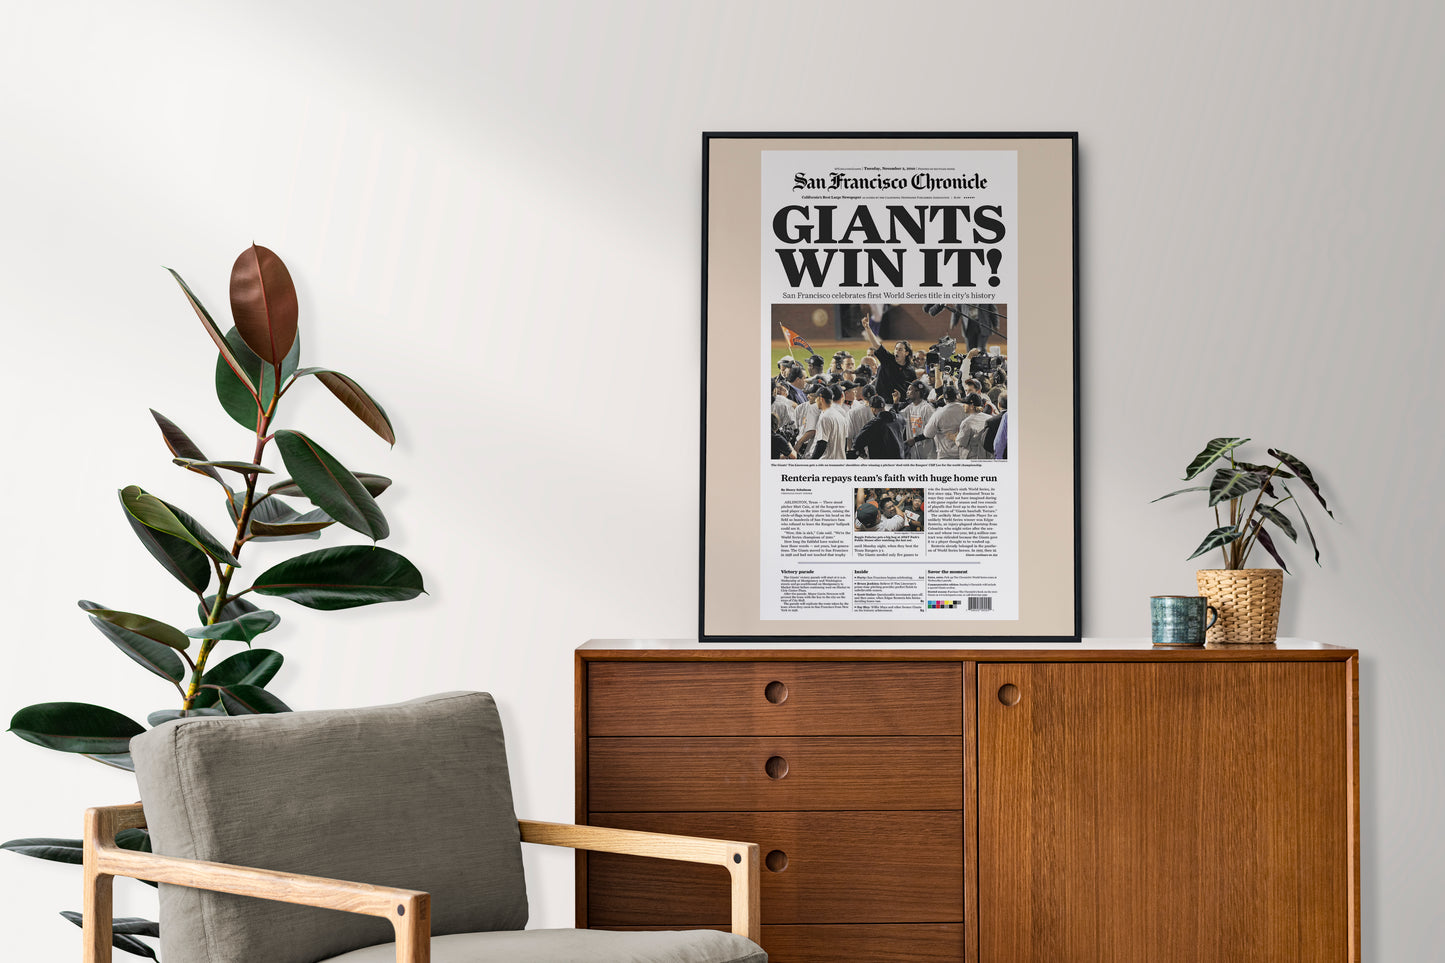 San Francisco Giants 2010 World Series MLB Champions Front Cover San Francisco Chronicle Newspaper Poster